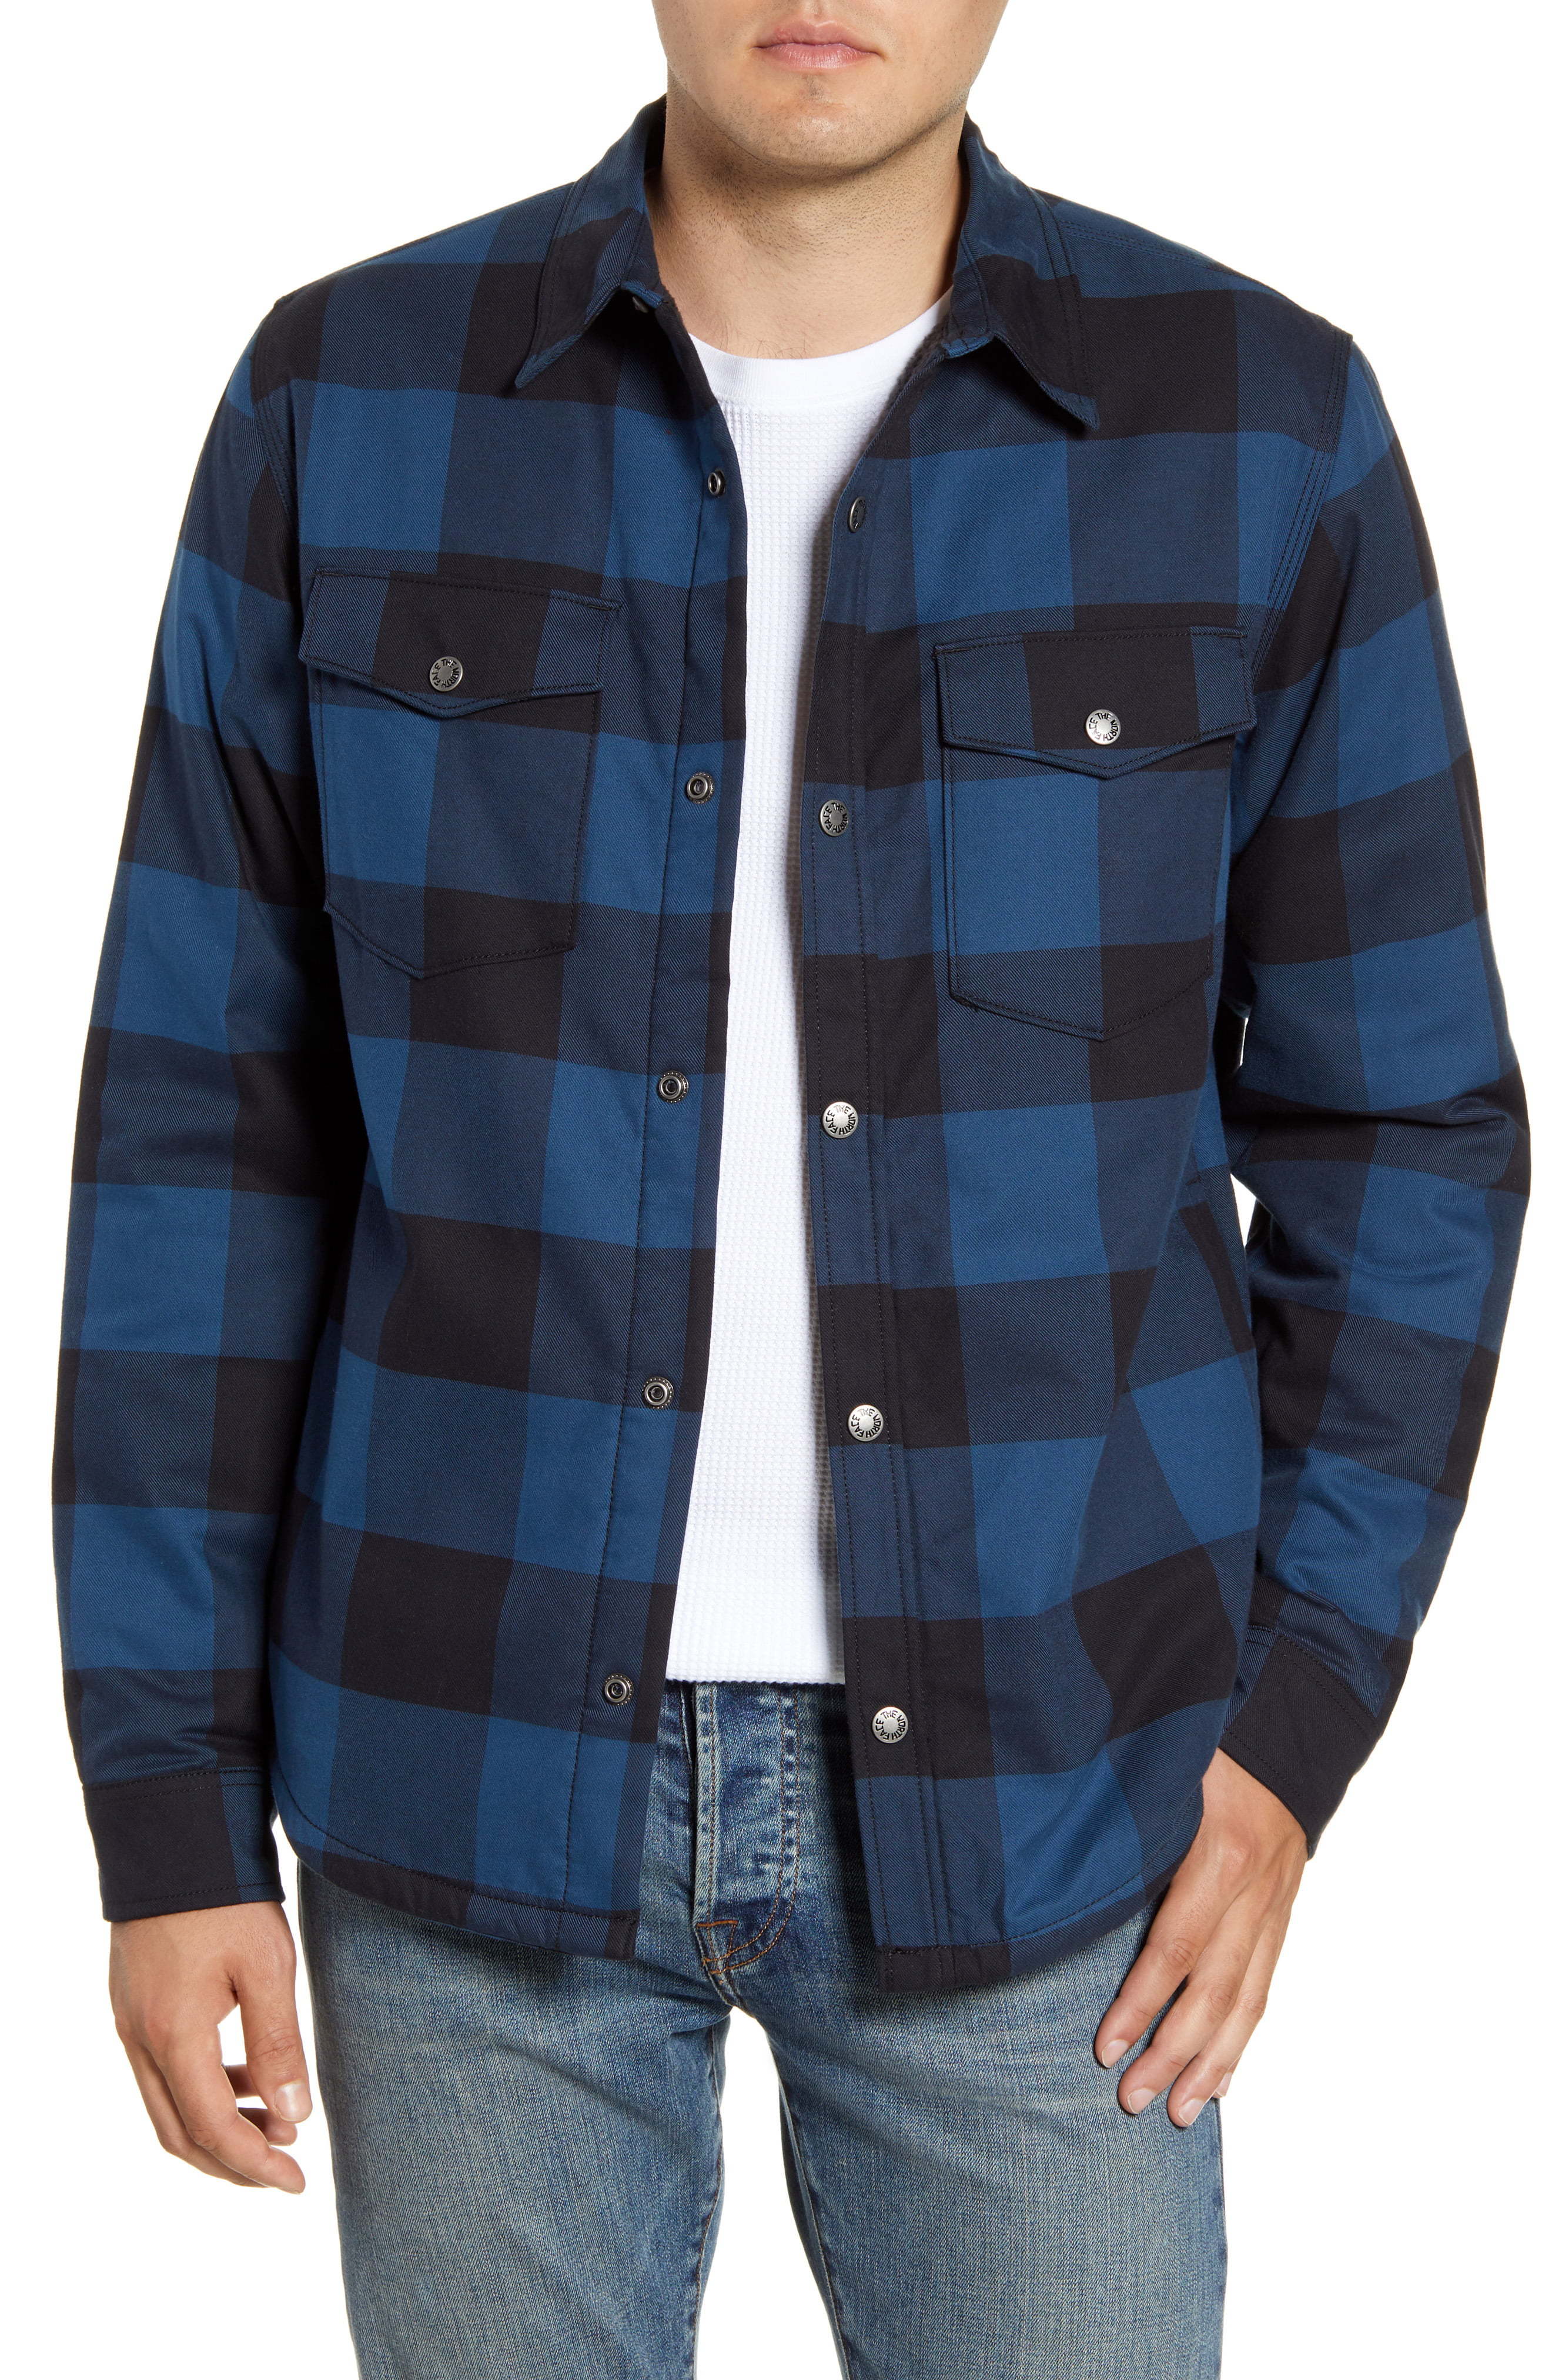 The North Face Campshire Shirt Jacket, $110 | Nordstrom | Lookastic